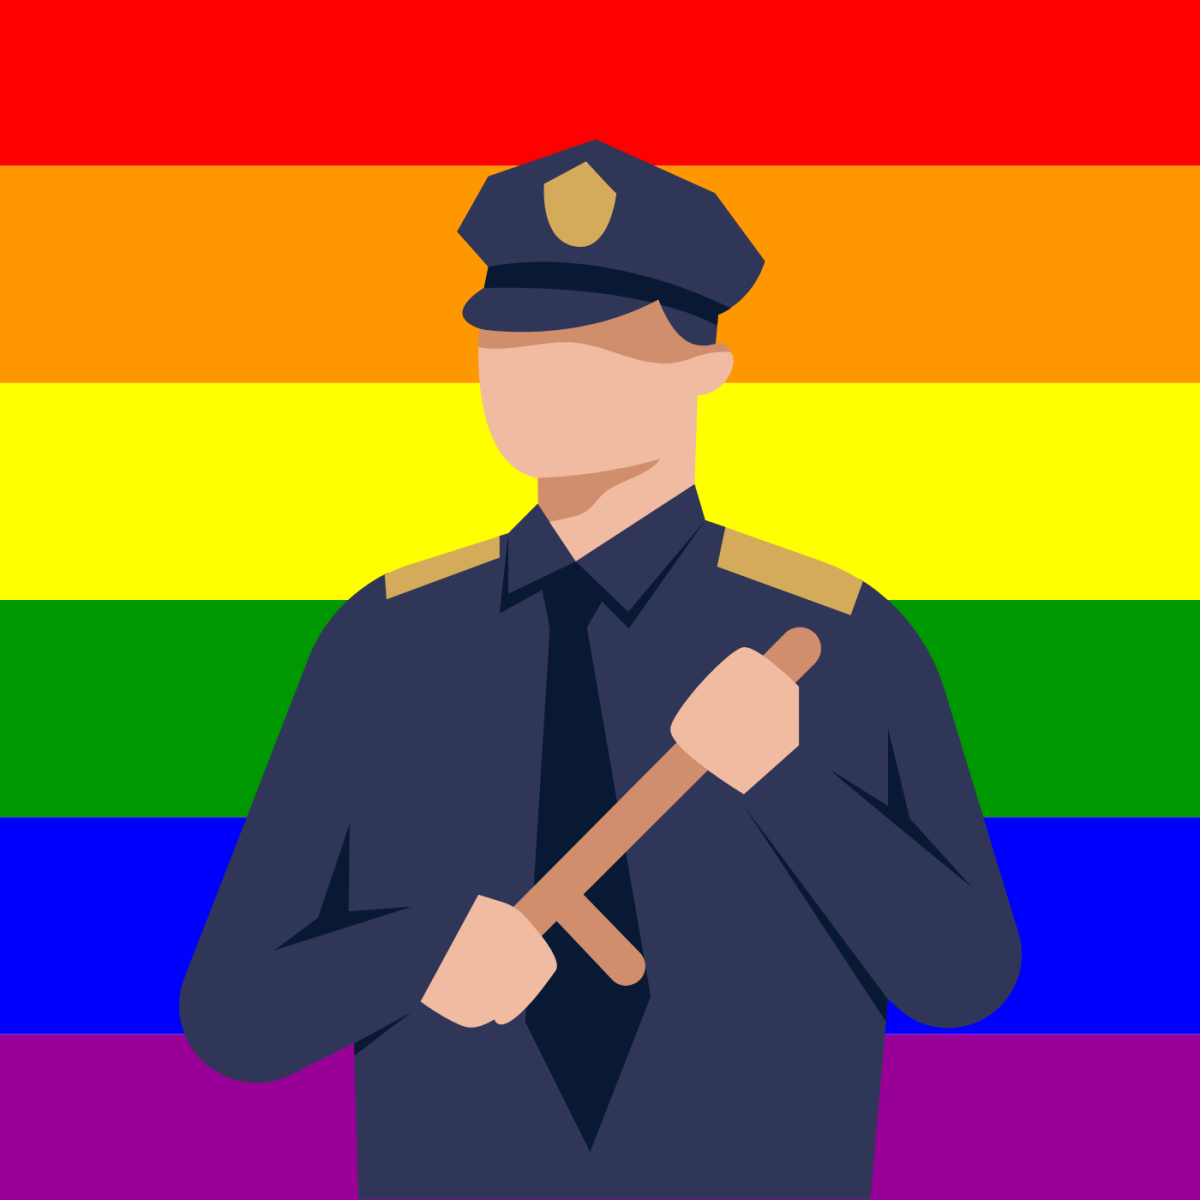 Law Enforcement and the LGBTQ Community